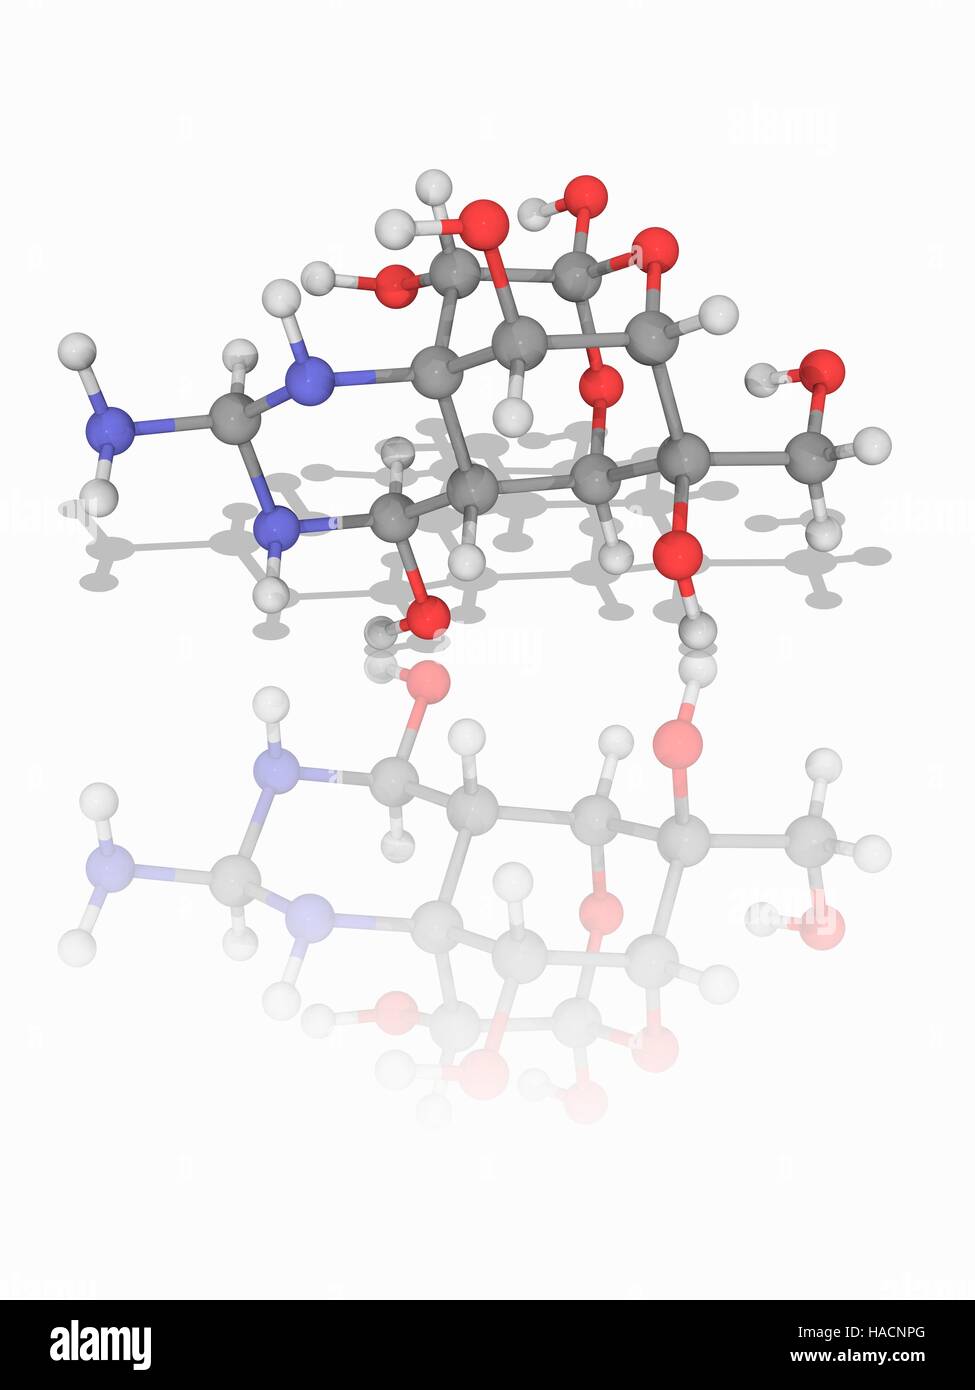 Tetrodotoxin. Molecular model of the potent neurotoxin tetrodotoxin (C11.H17.N3.O8, TTX), found in several marine species including the pufferfish. There is no known antidote. Atoms are represented as spheres and are colour-coded: carbon (grey), hydrogen (white), nitrogen (blue) and oxygen (red). Illustration. Stock Photo